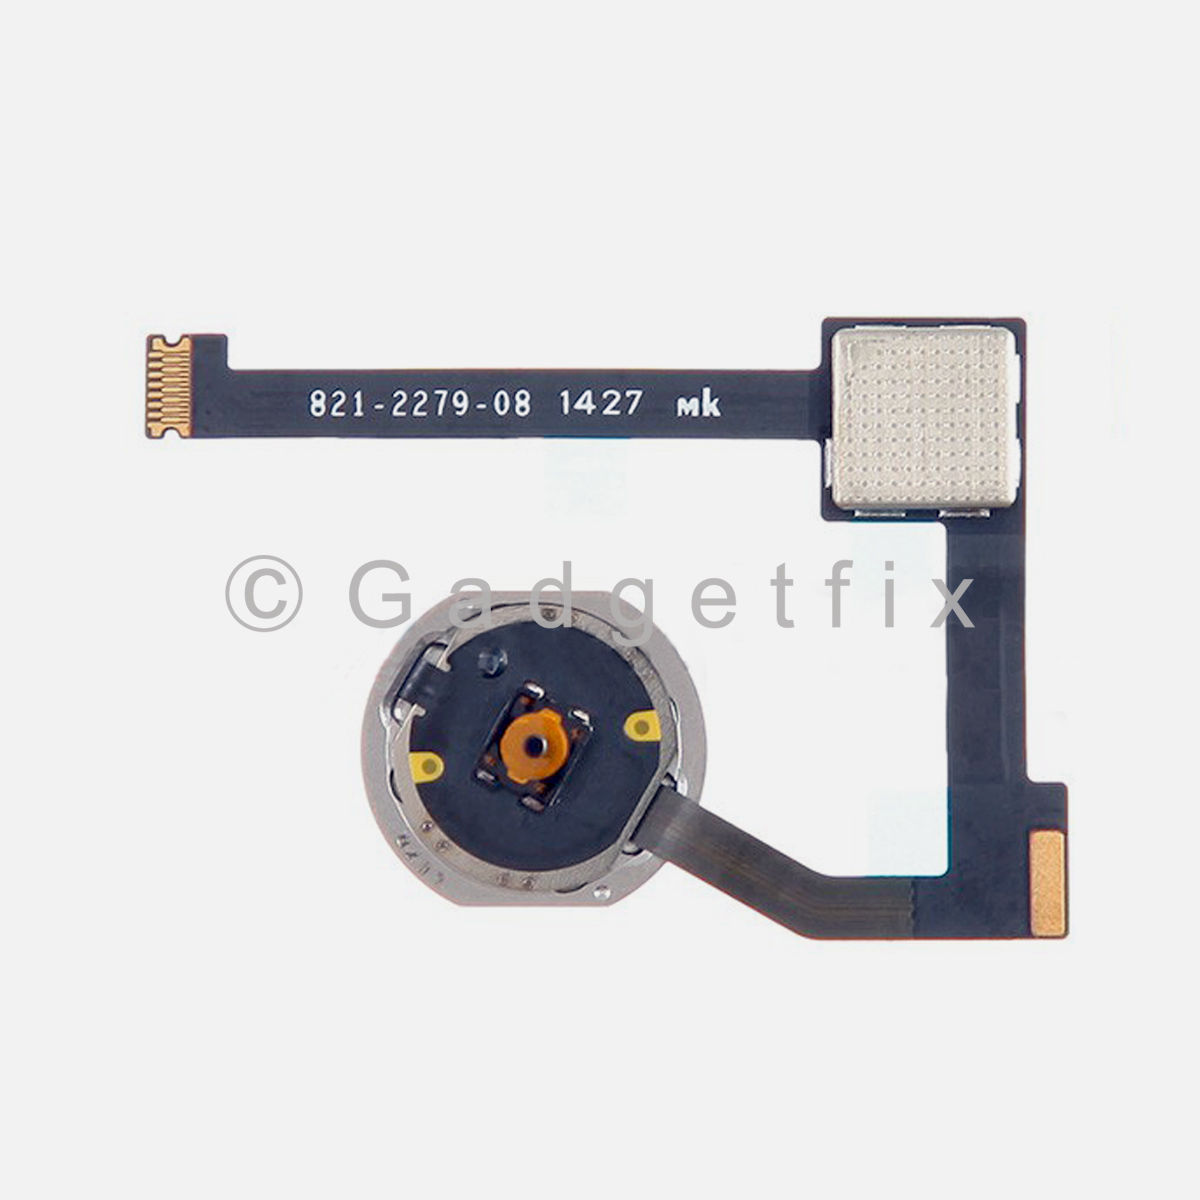 Silver Home Menu Button Flex Cable Replacement Part for iPad Air 2 A1566 A1567